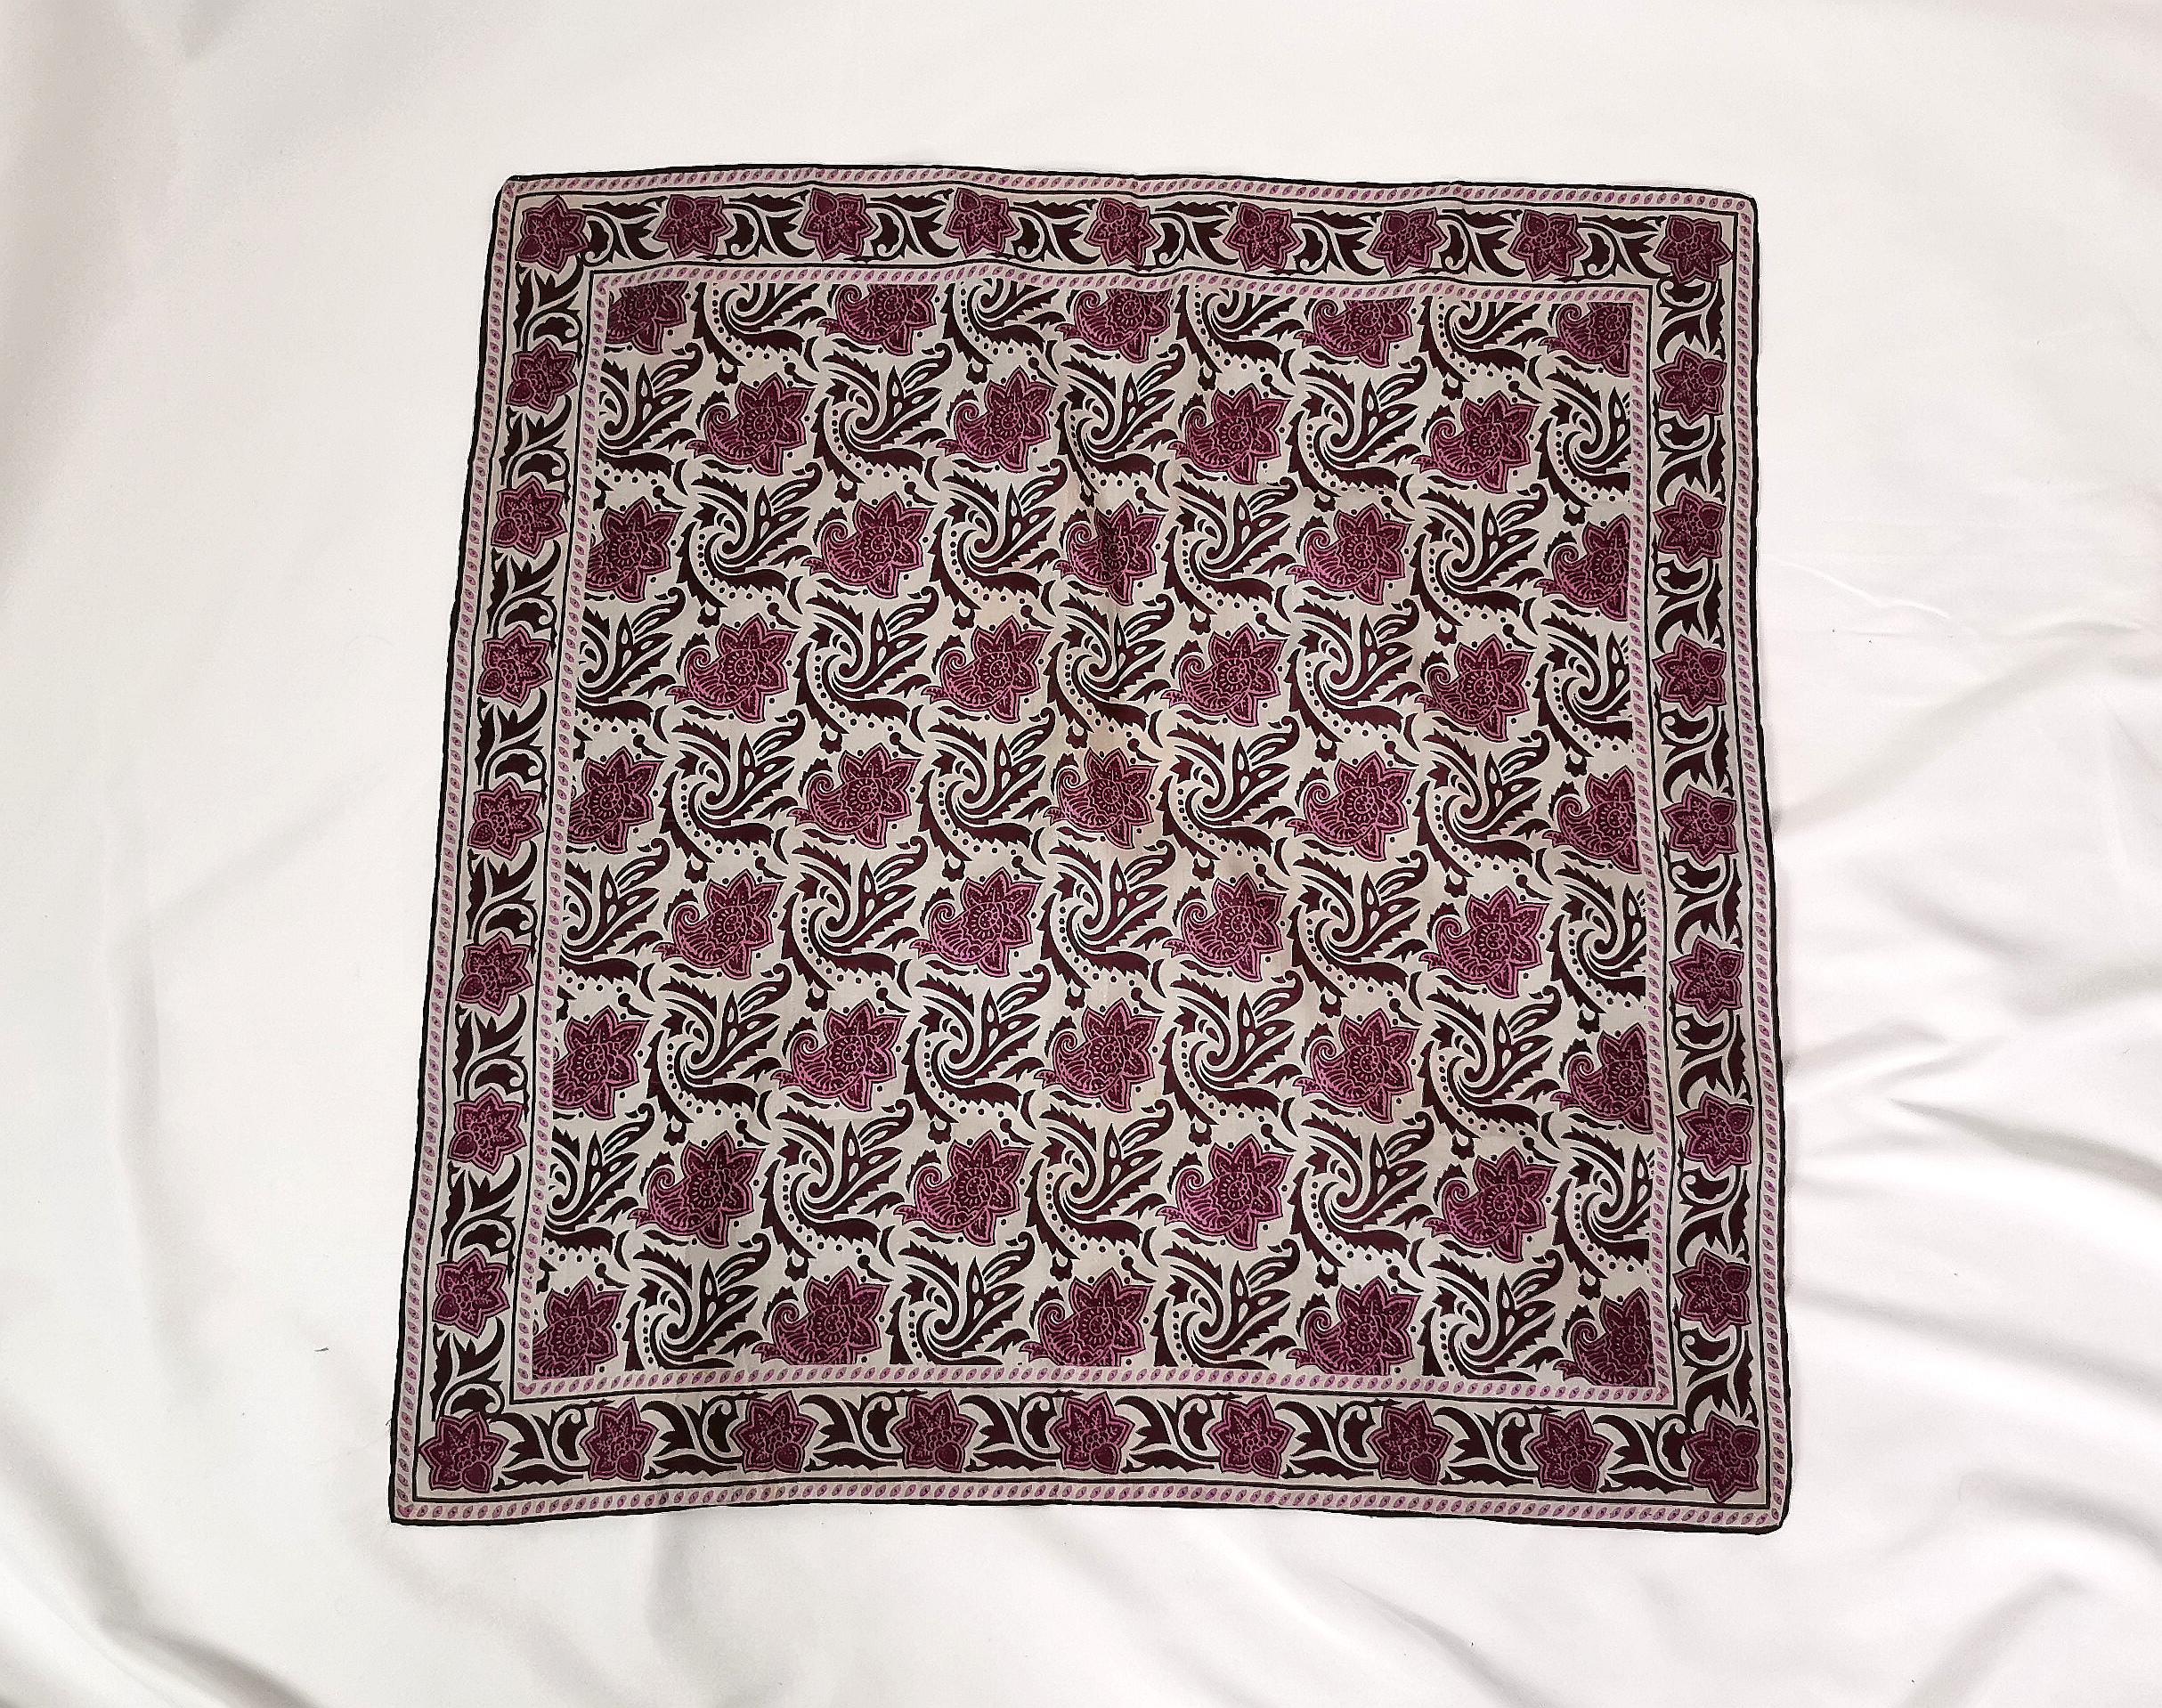 A very attractive vintage silk scarf by Jaeger.

It is a square shape, printed with a lovely abstract paisley print in rich colours of burgandy, magenta and cool off white.

A beautiful piece and versatile too, can be used in many ways and has a